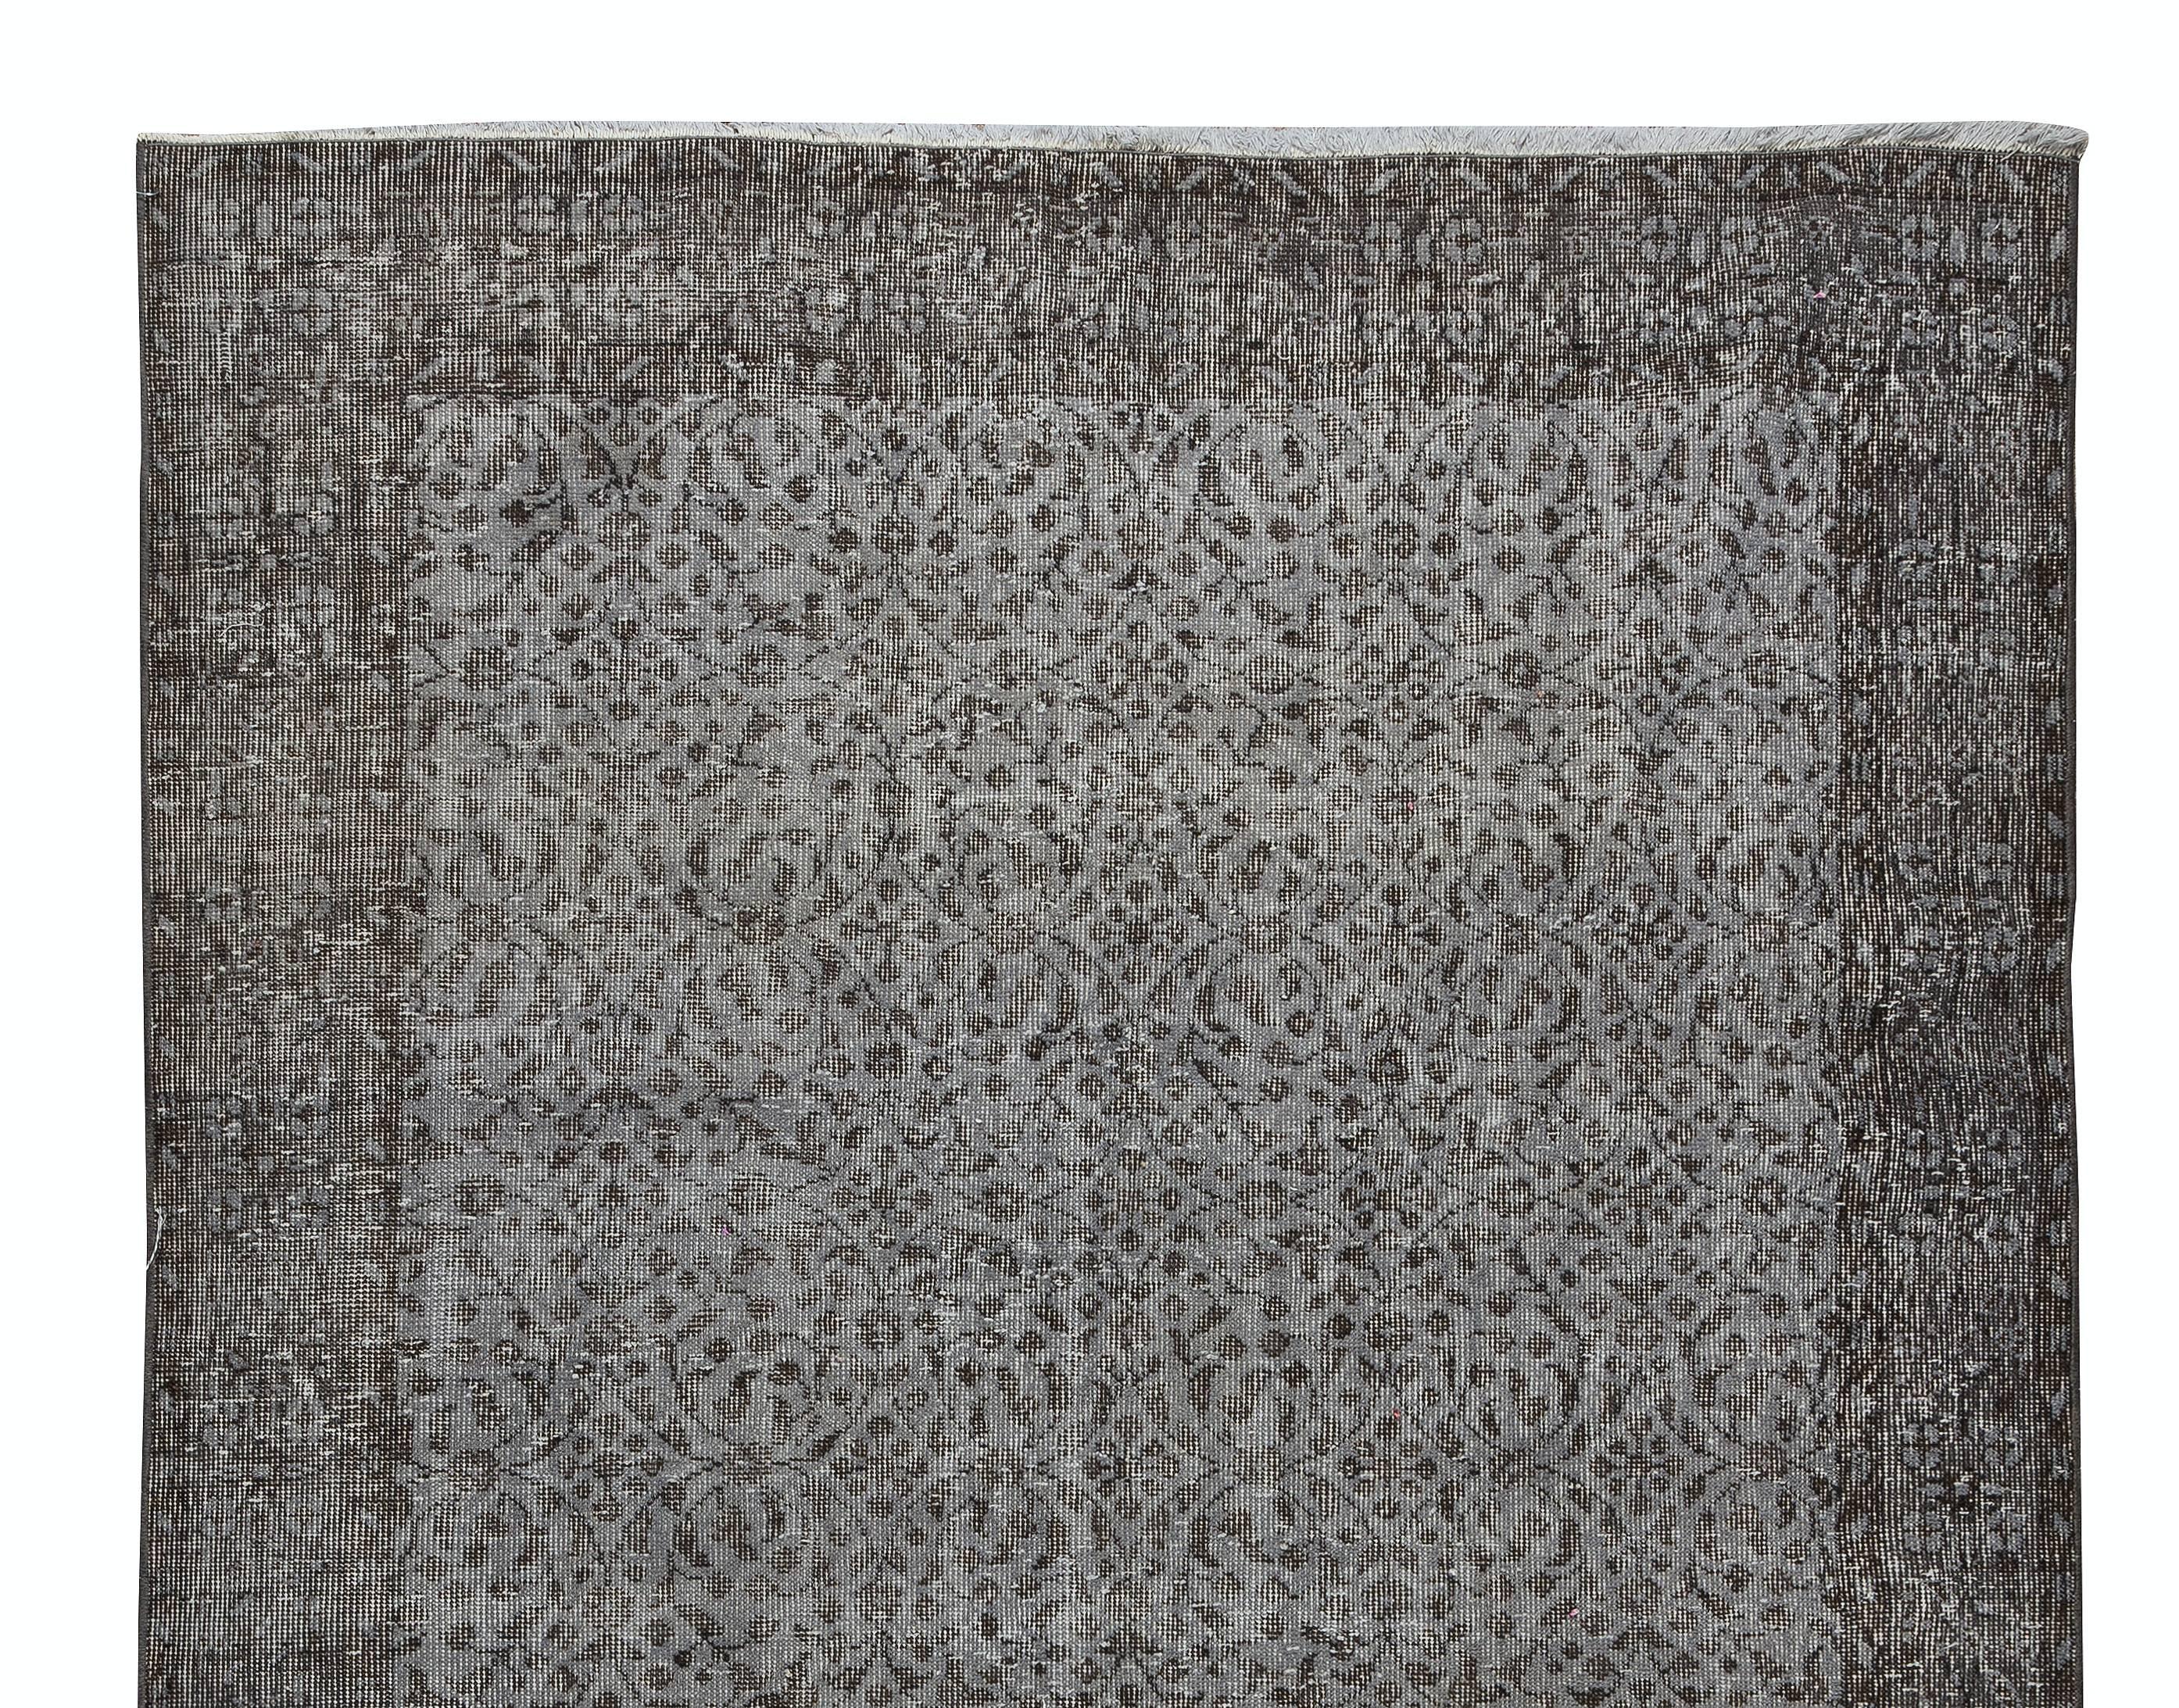 Hand-Knotted 5.6x8.9 Ft Contemporary Turkish Rug Re-Dyed in Gray, Vintage Turkish Wool Carpet For Sale